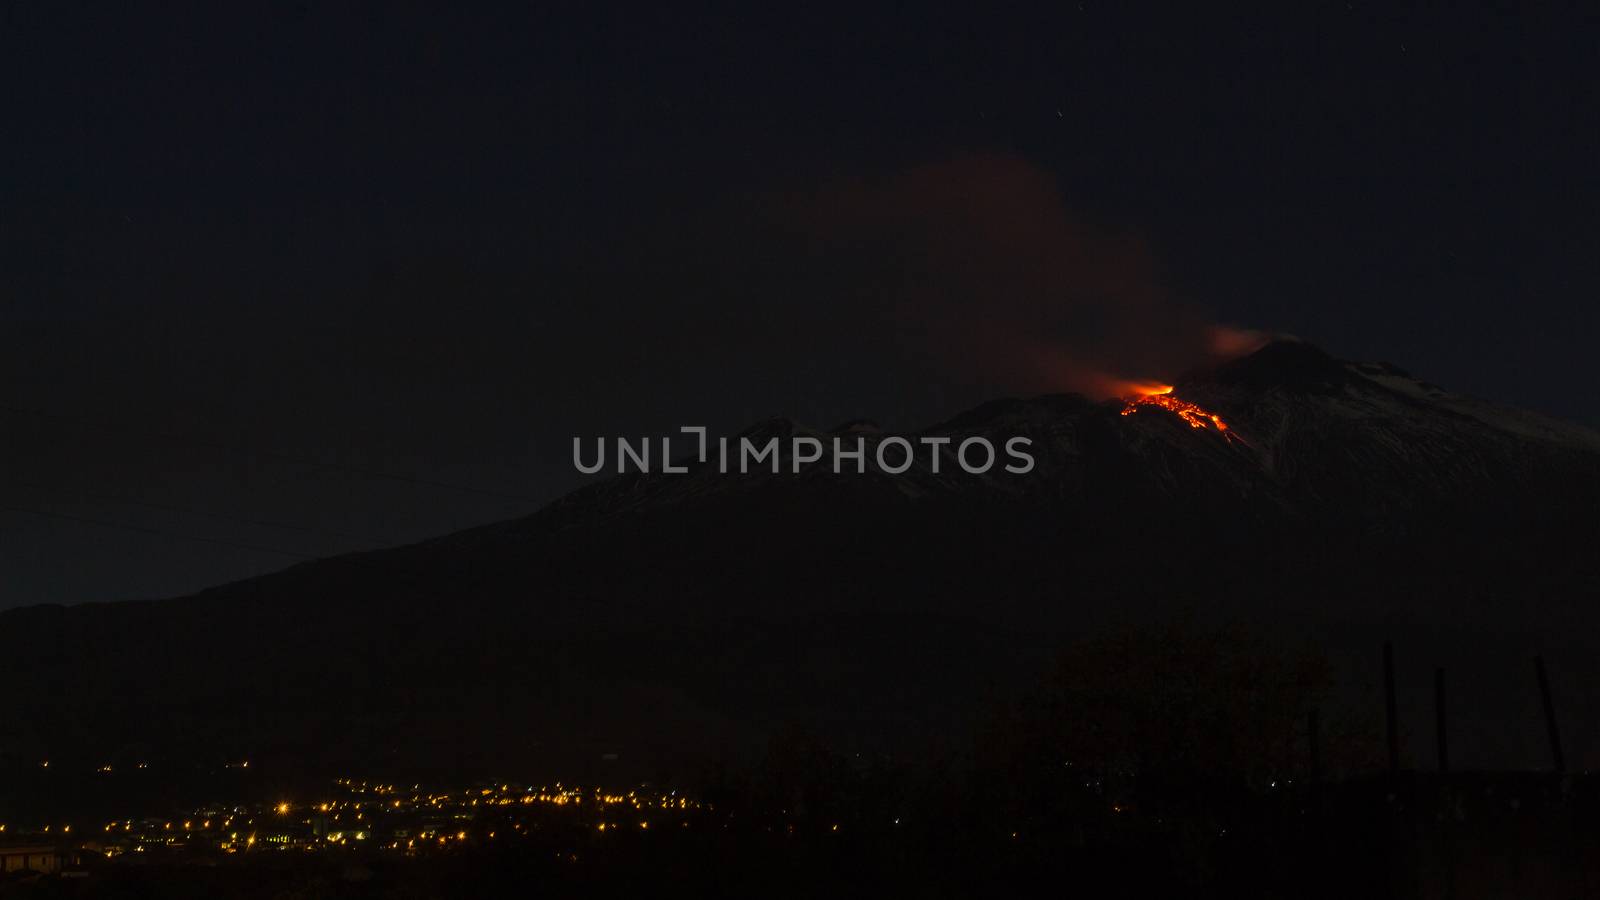 Eruption volcano Etna of april 2017. Mount Etna is an active stratovolcano on the east coast of Sicily, Italy, in the Province of Catania, between Messina and Catania.